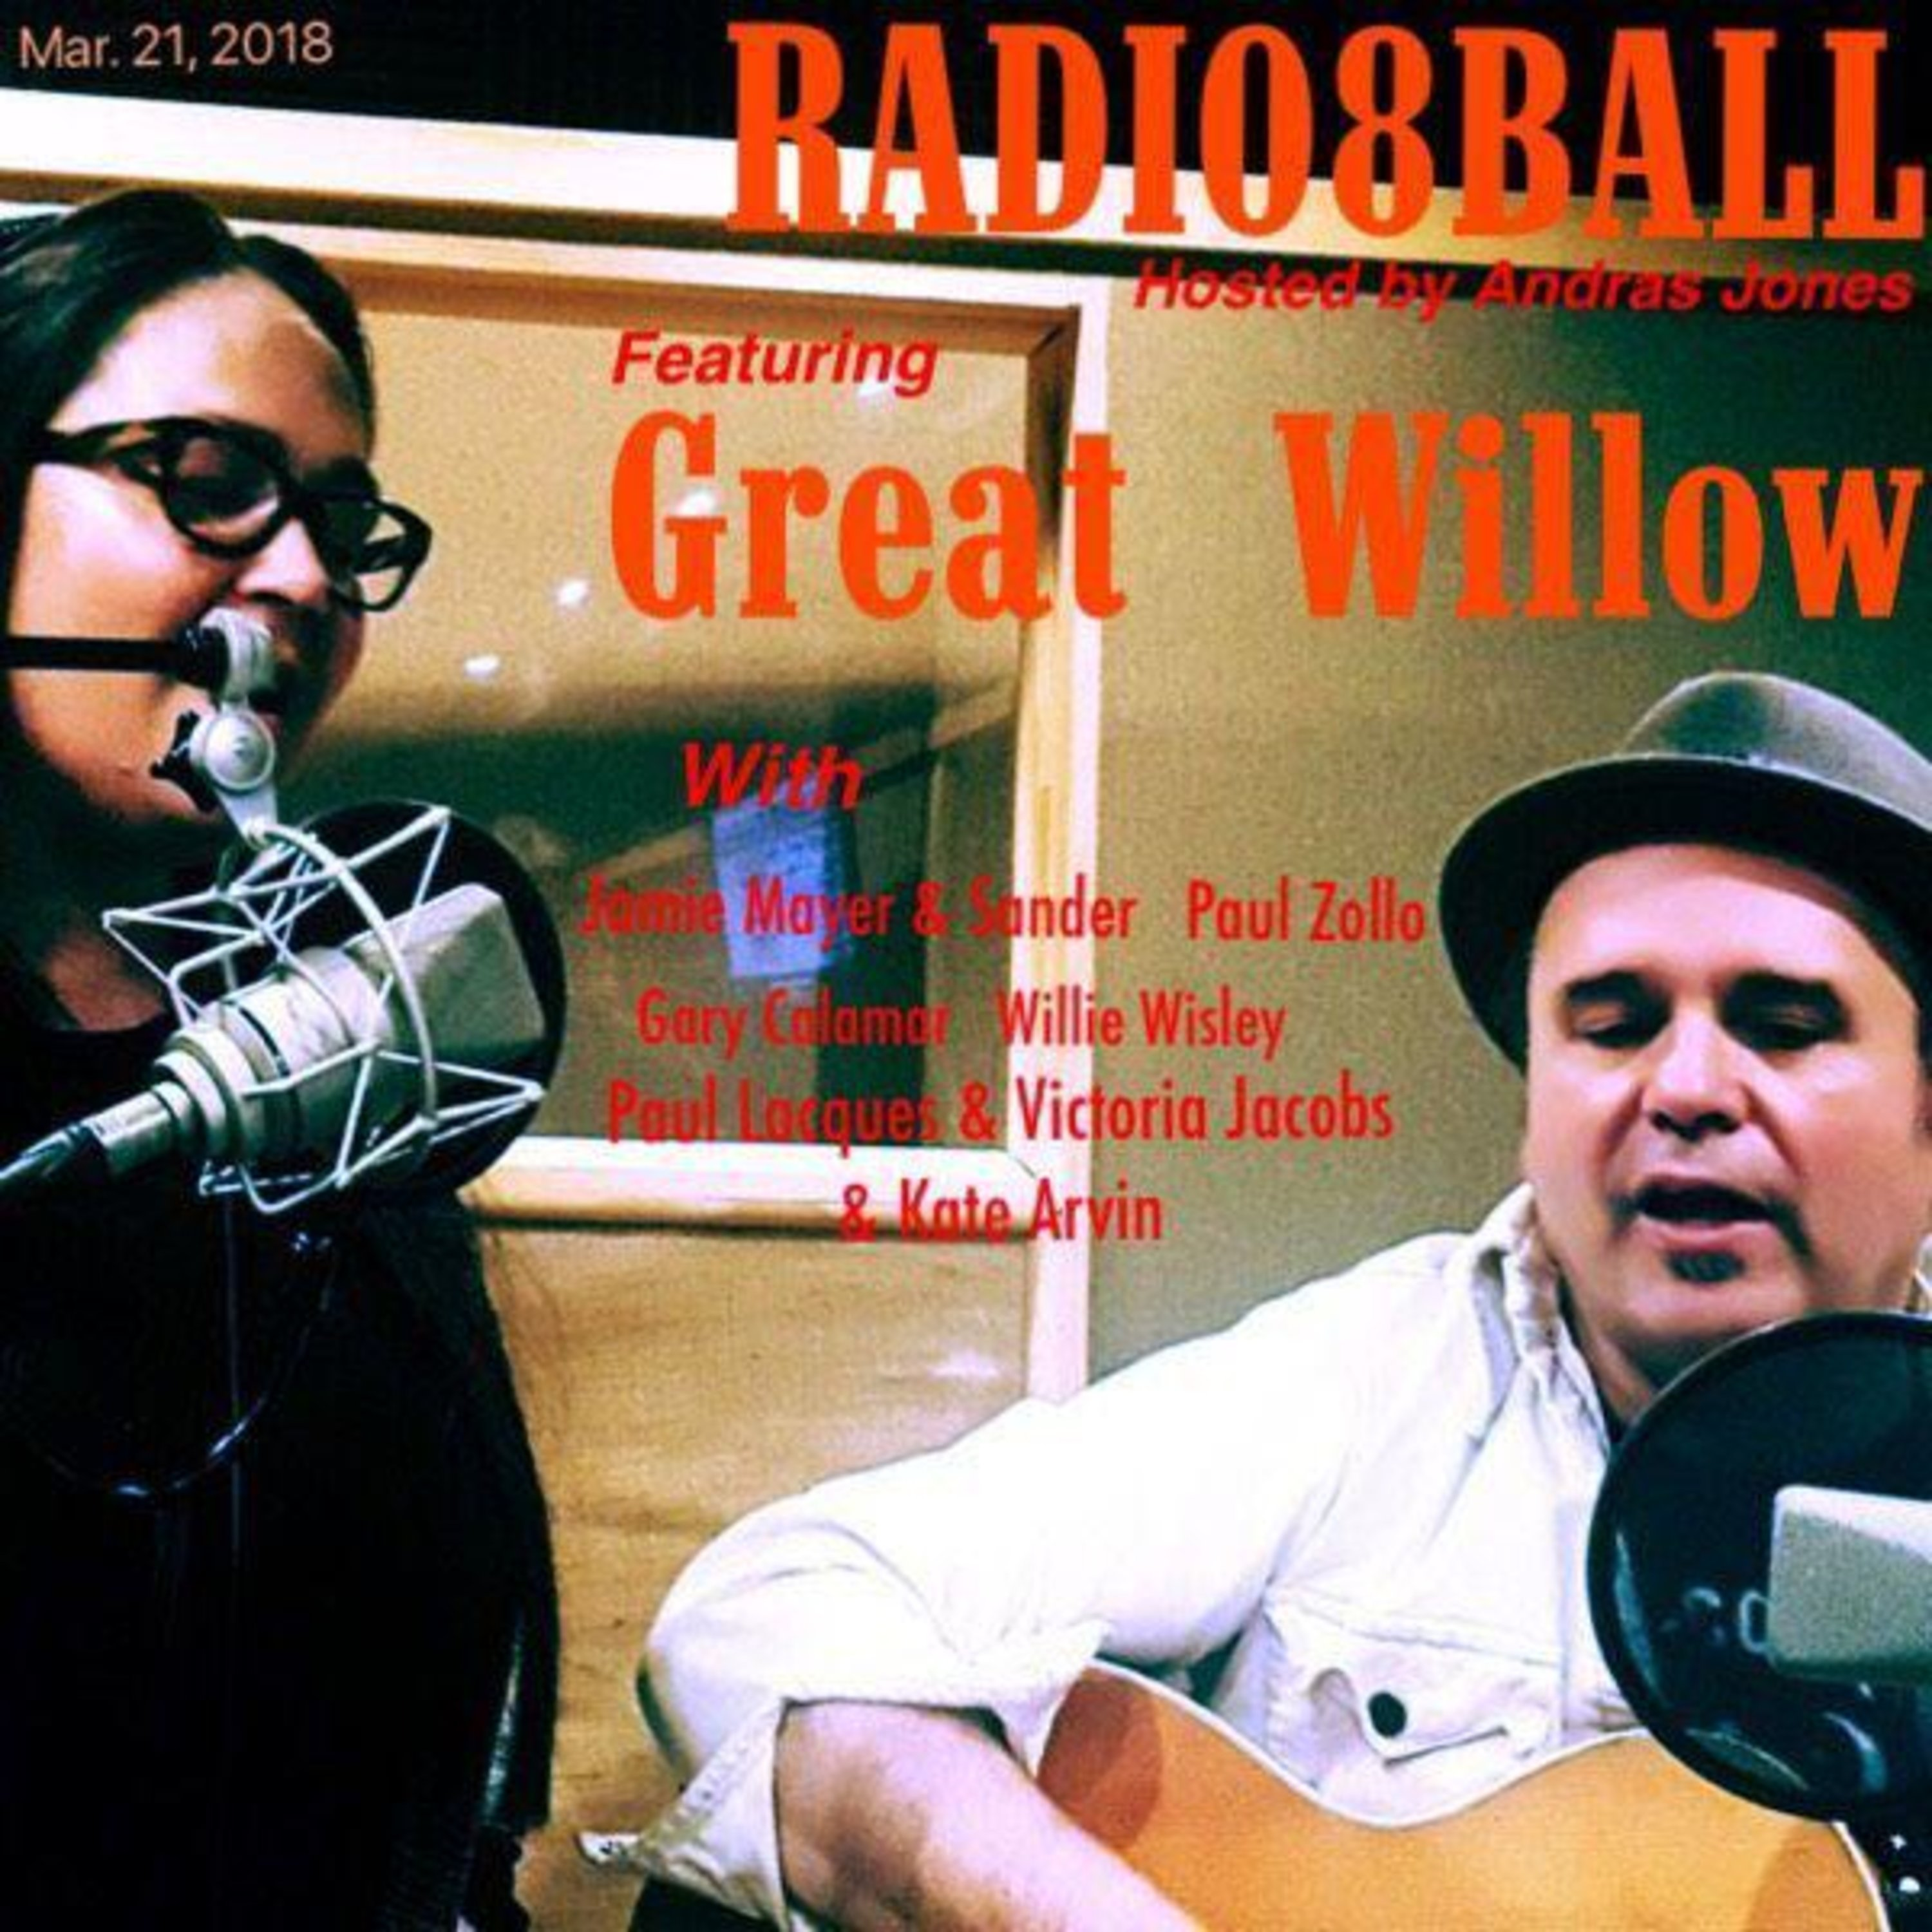 198: Paul Lacques & Victoria Jacobs & Great Willow (March 21, 2018 - Pod 6)